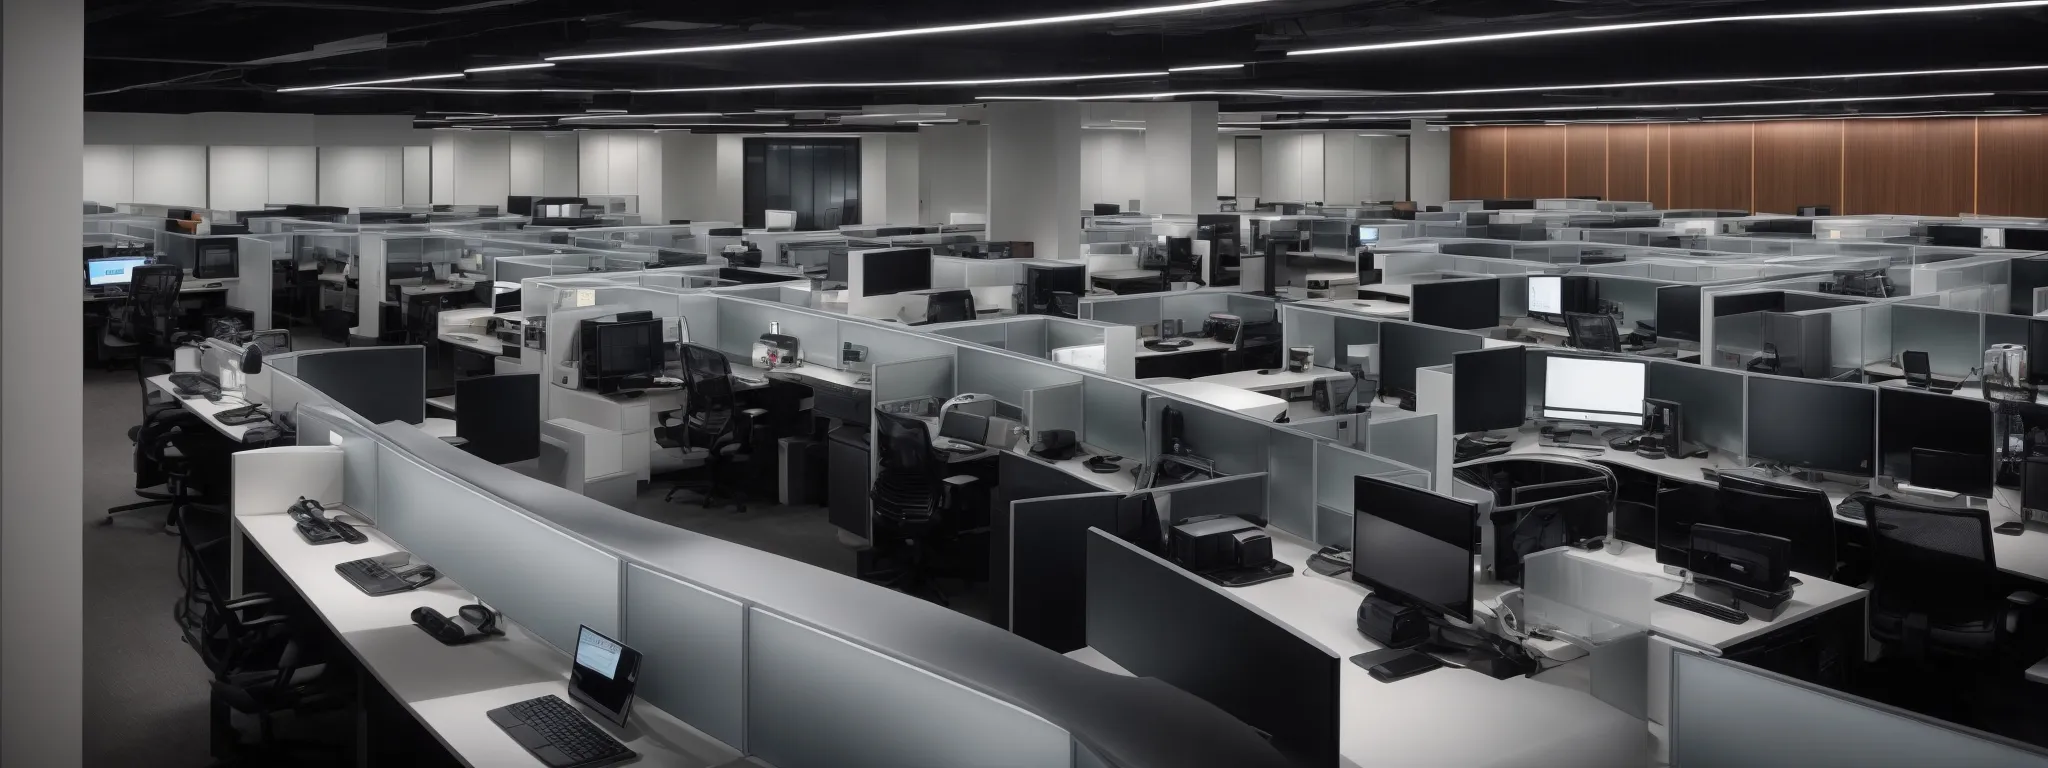 a sleek, modern office with rows of computer workstations, hinting at cutting-edge technology use in a corporate environment.